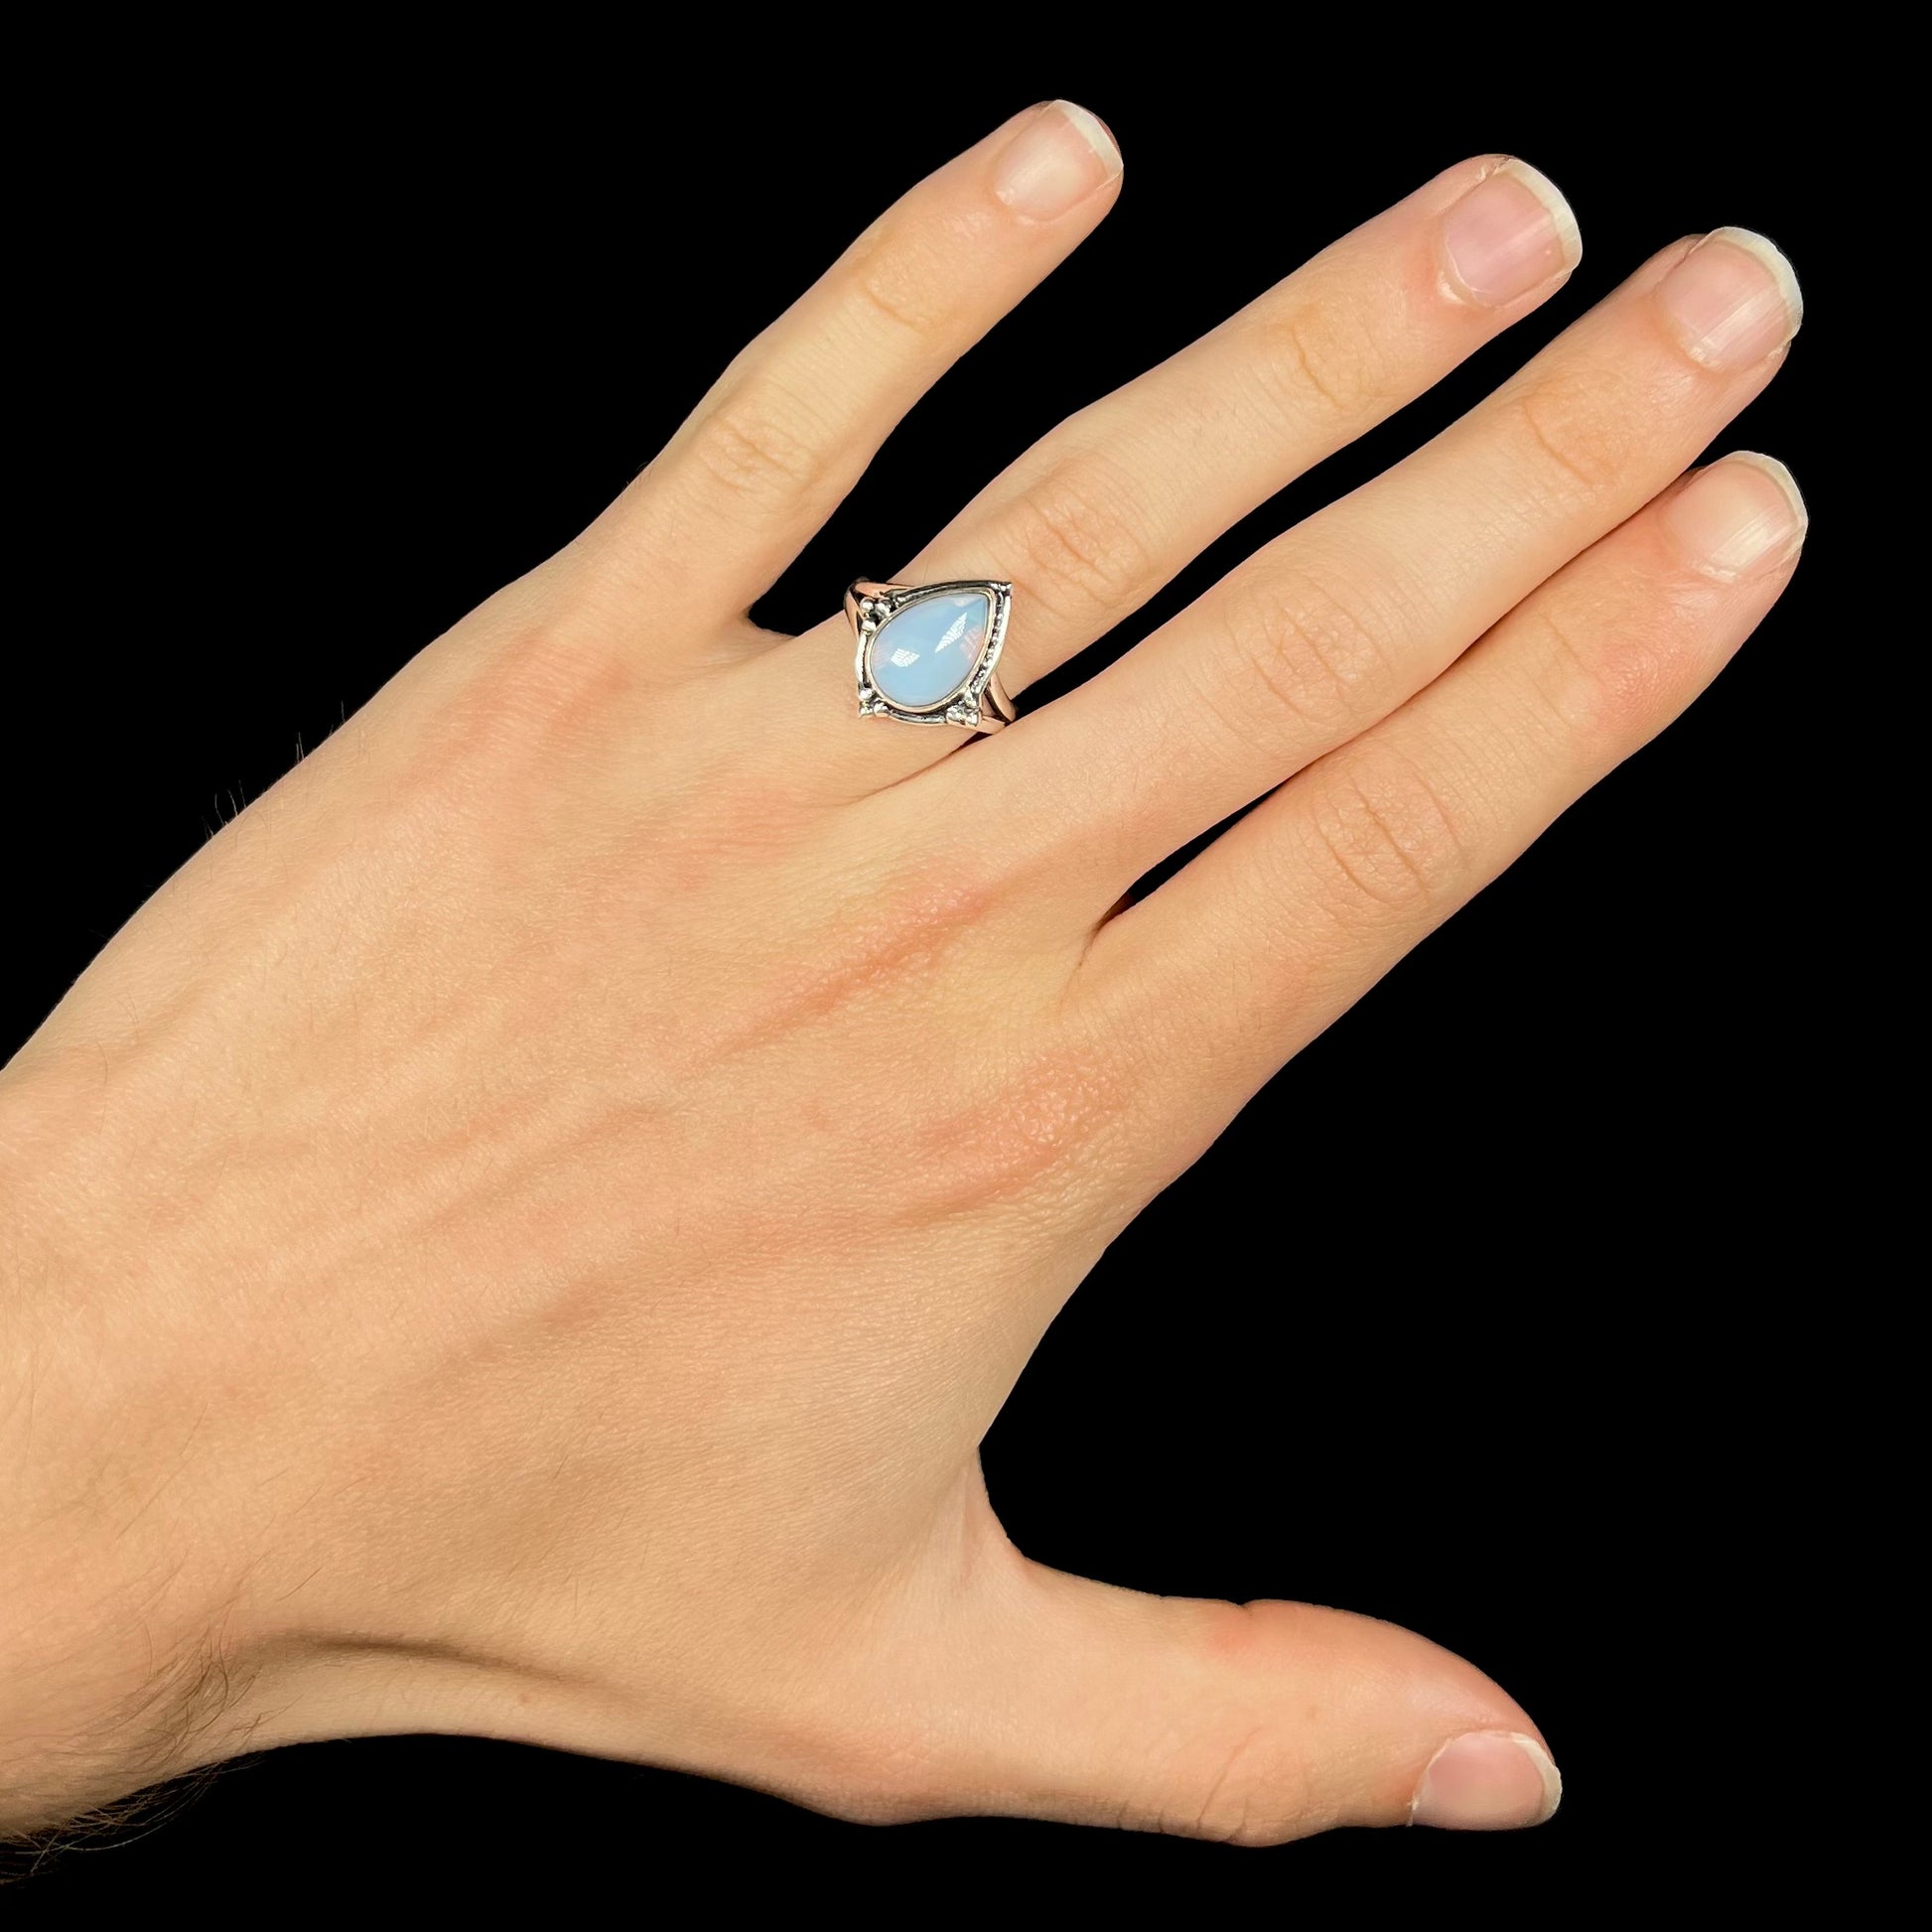 A handmade white metal ring set with a pear shaped opalite cabochon.